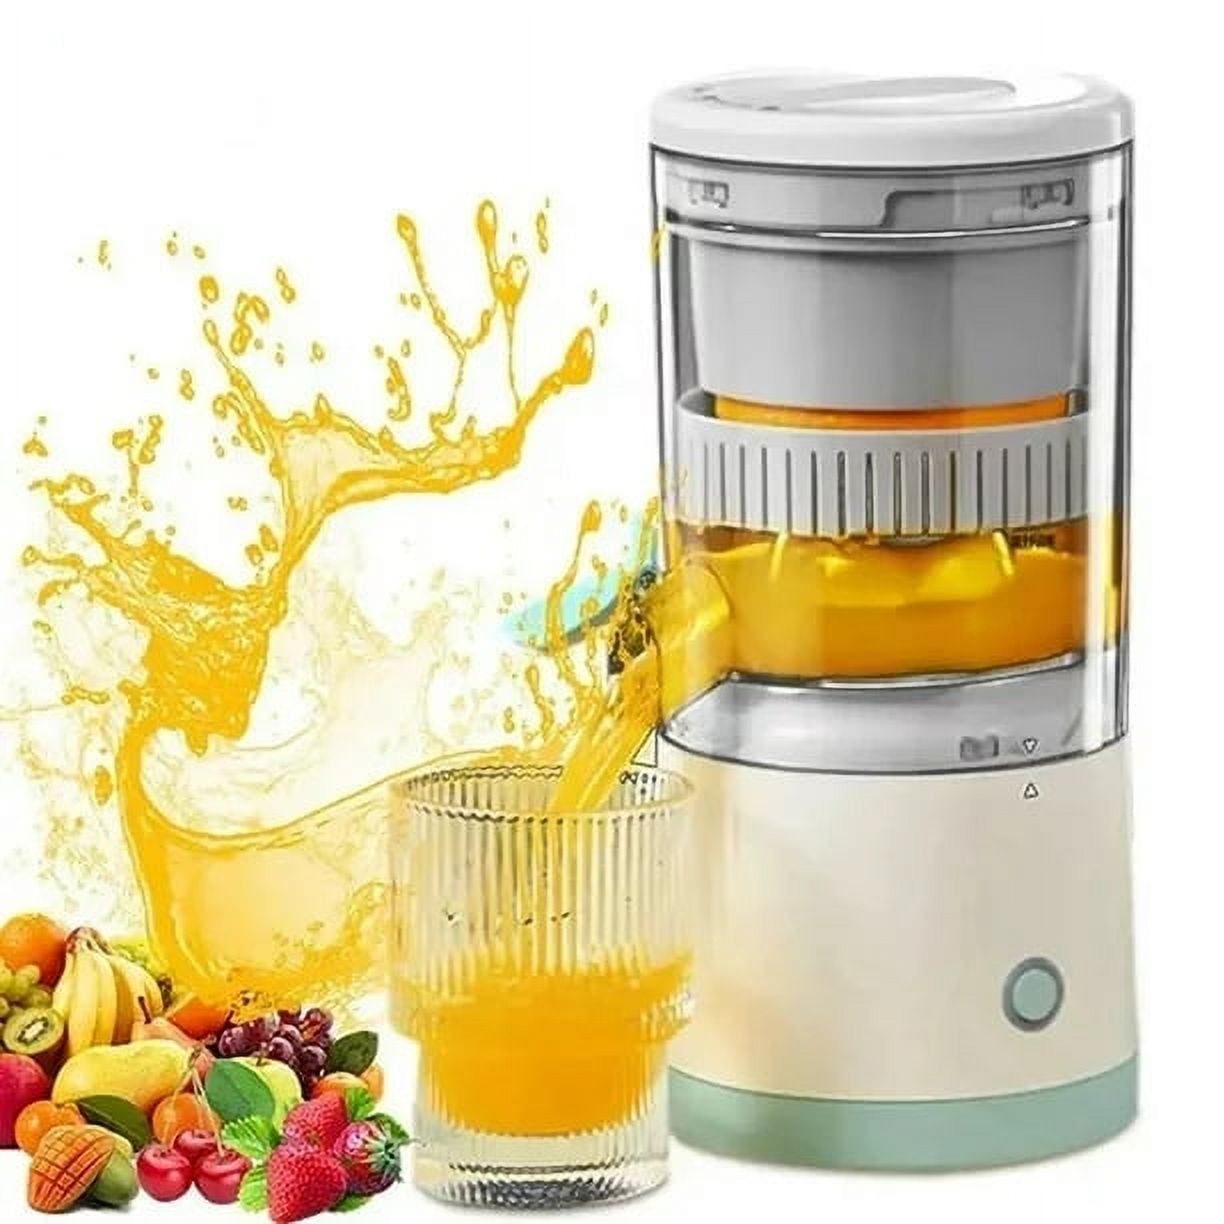 Juicers ECOCO Cute Manual Juicing Cup Orange Juicer Lemon Juice Portable  Squeezer Pressure Fruit Juicer For Home Kitchen Accessories P230407 From  Wangcai09, $10.25